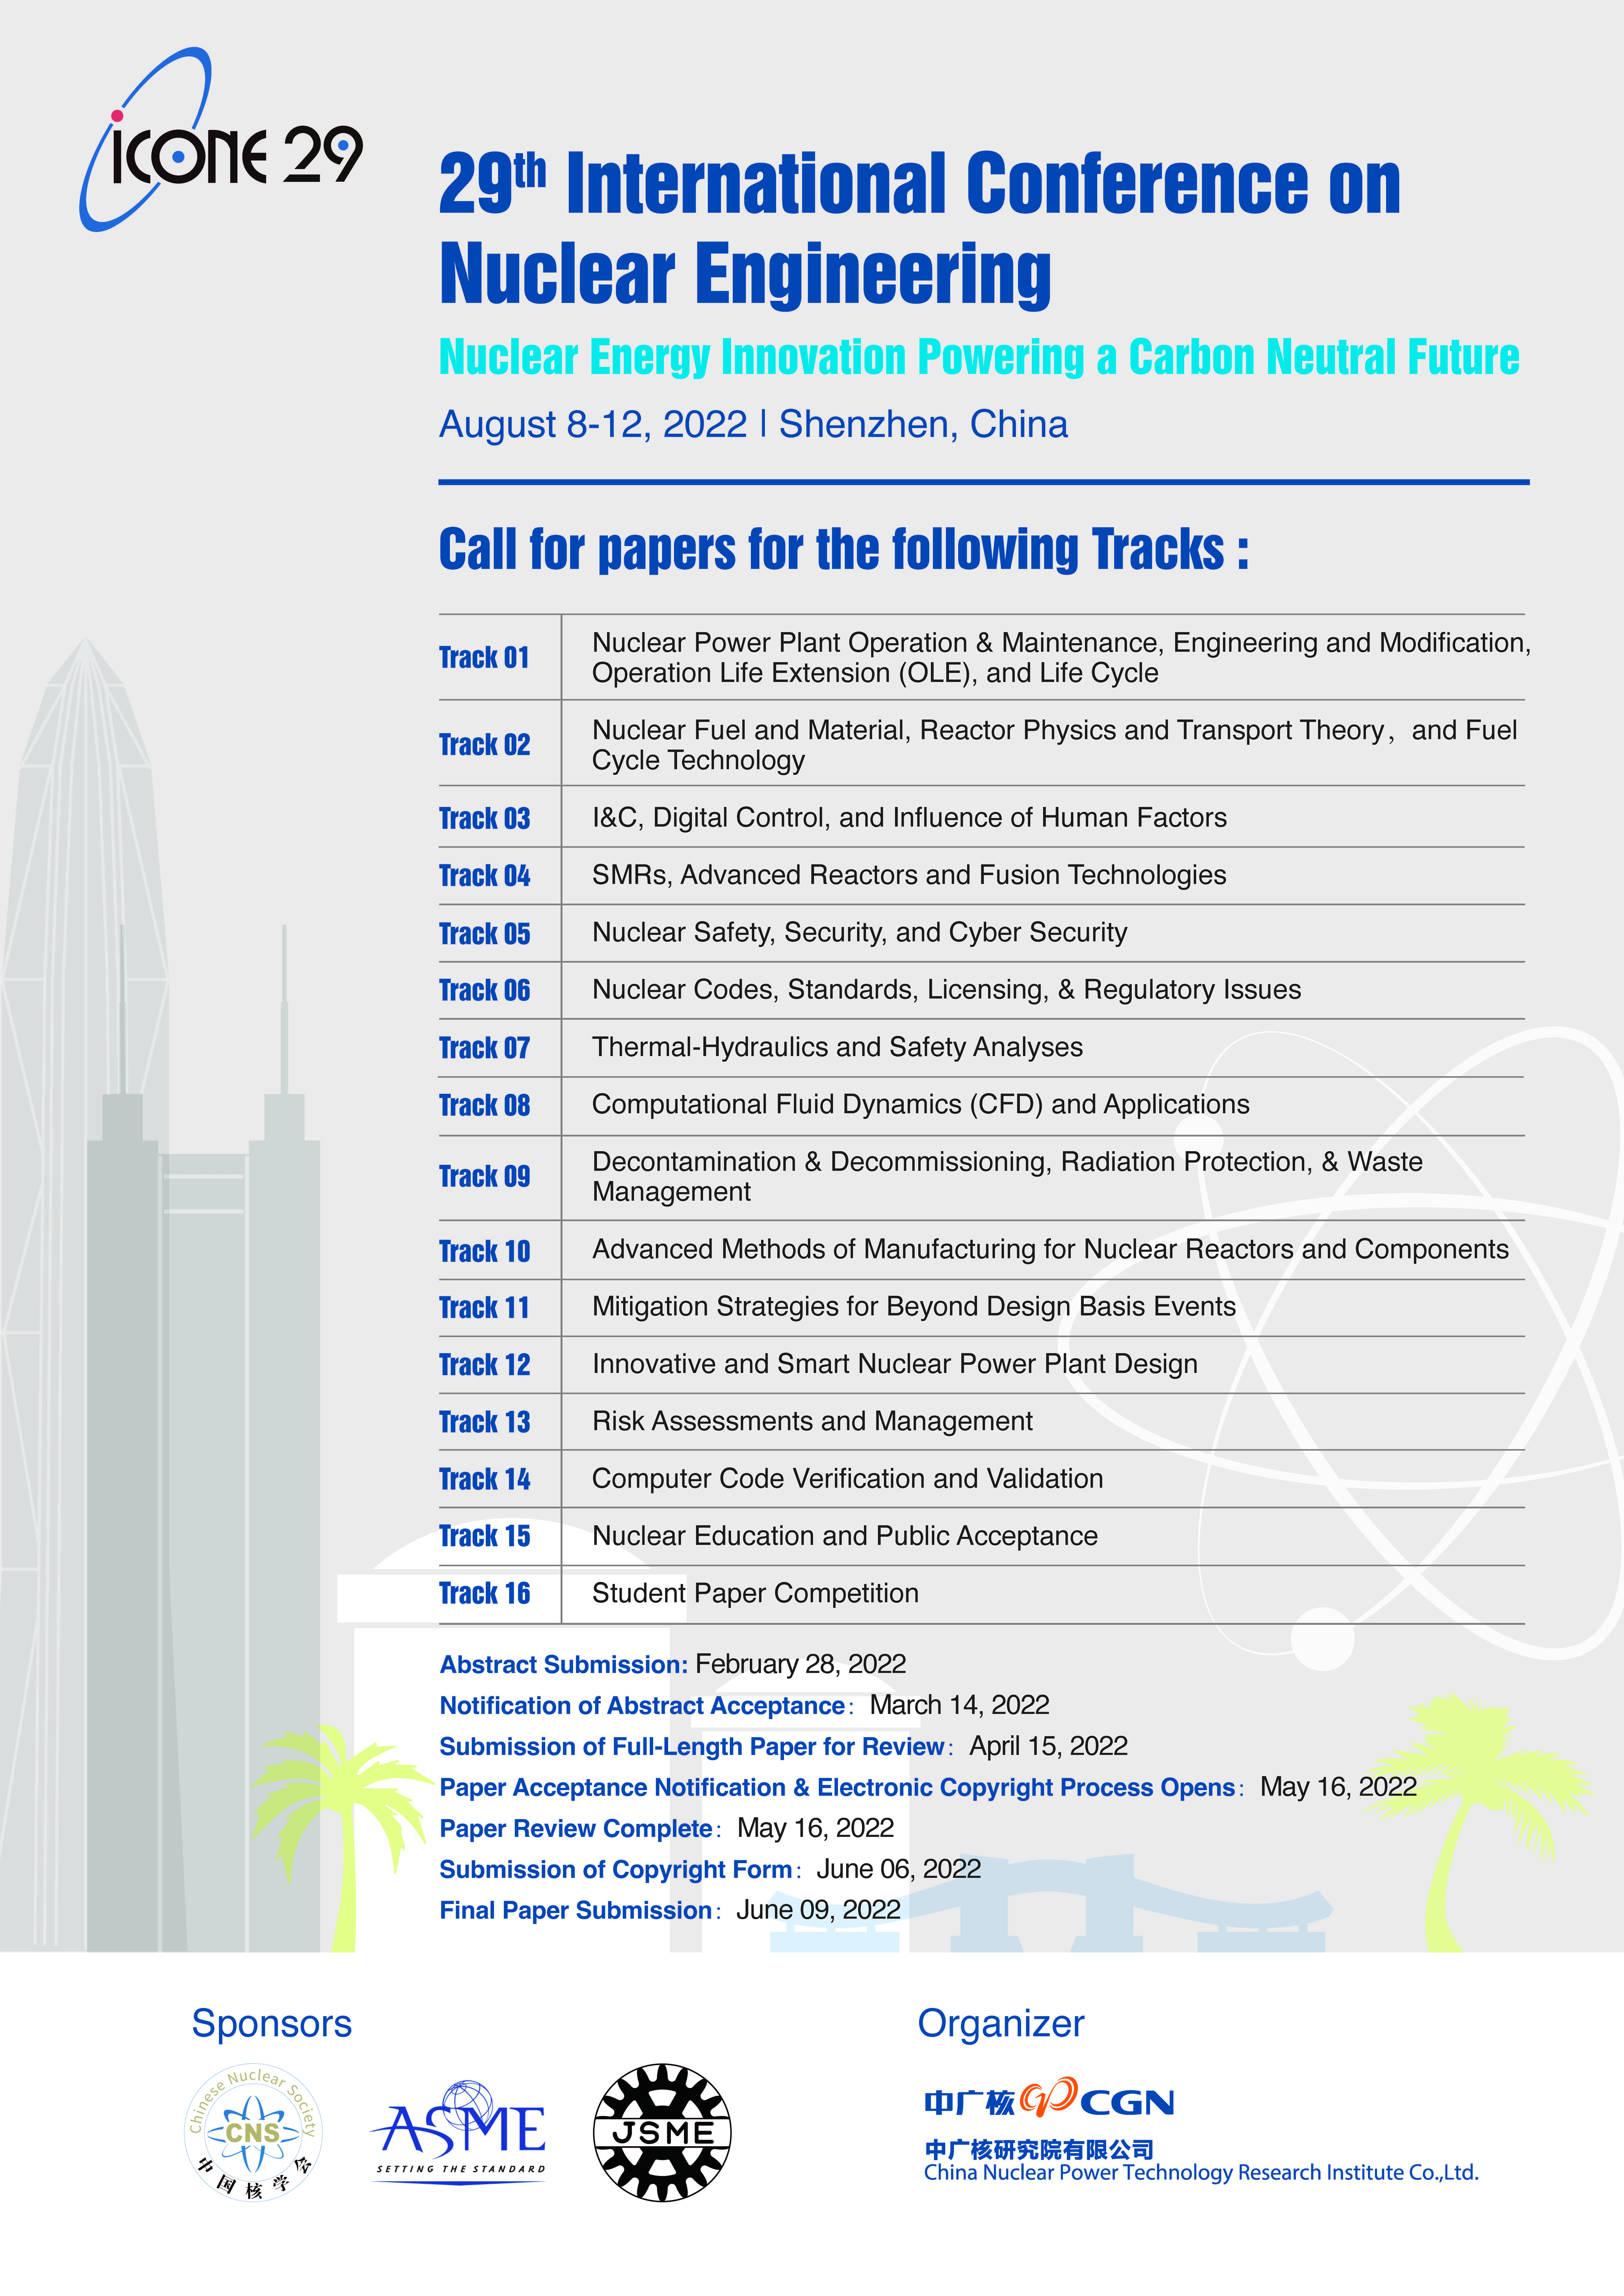 ICONE29 CALL FOR PAPERS_页面_2.jpg